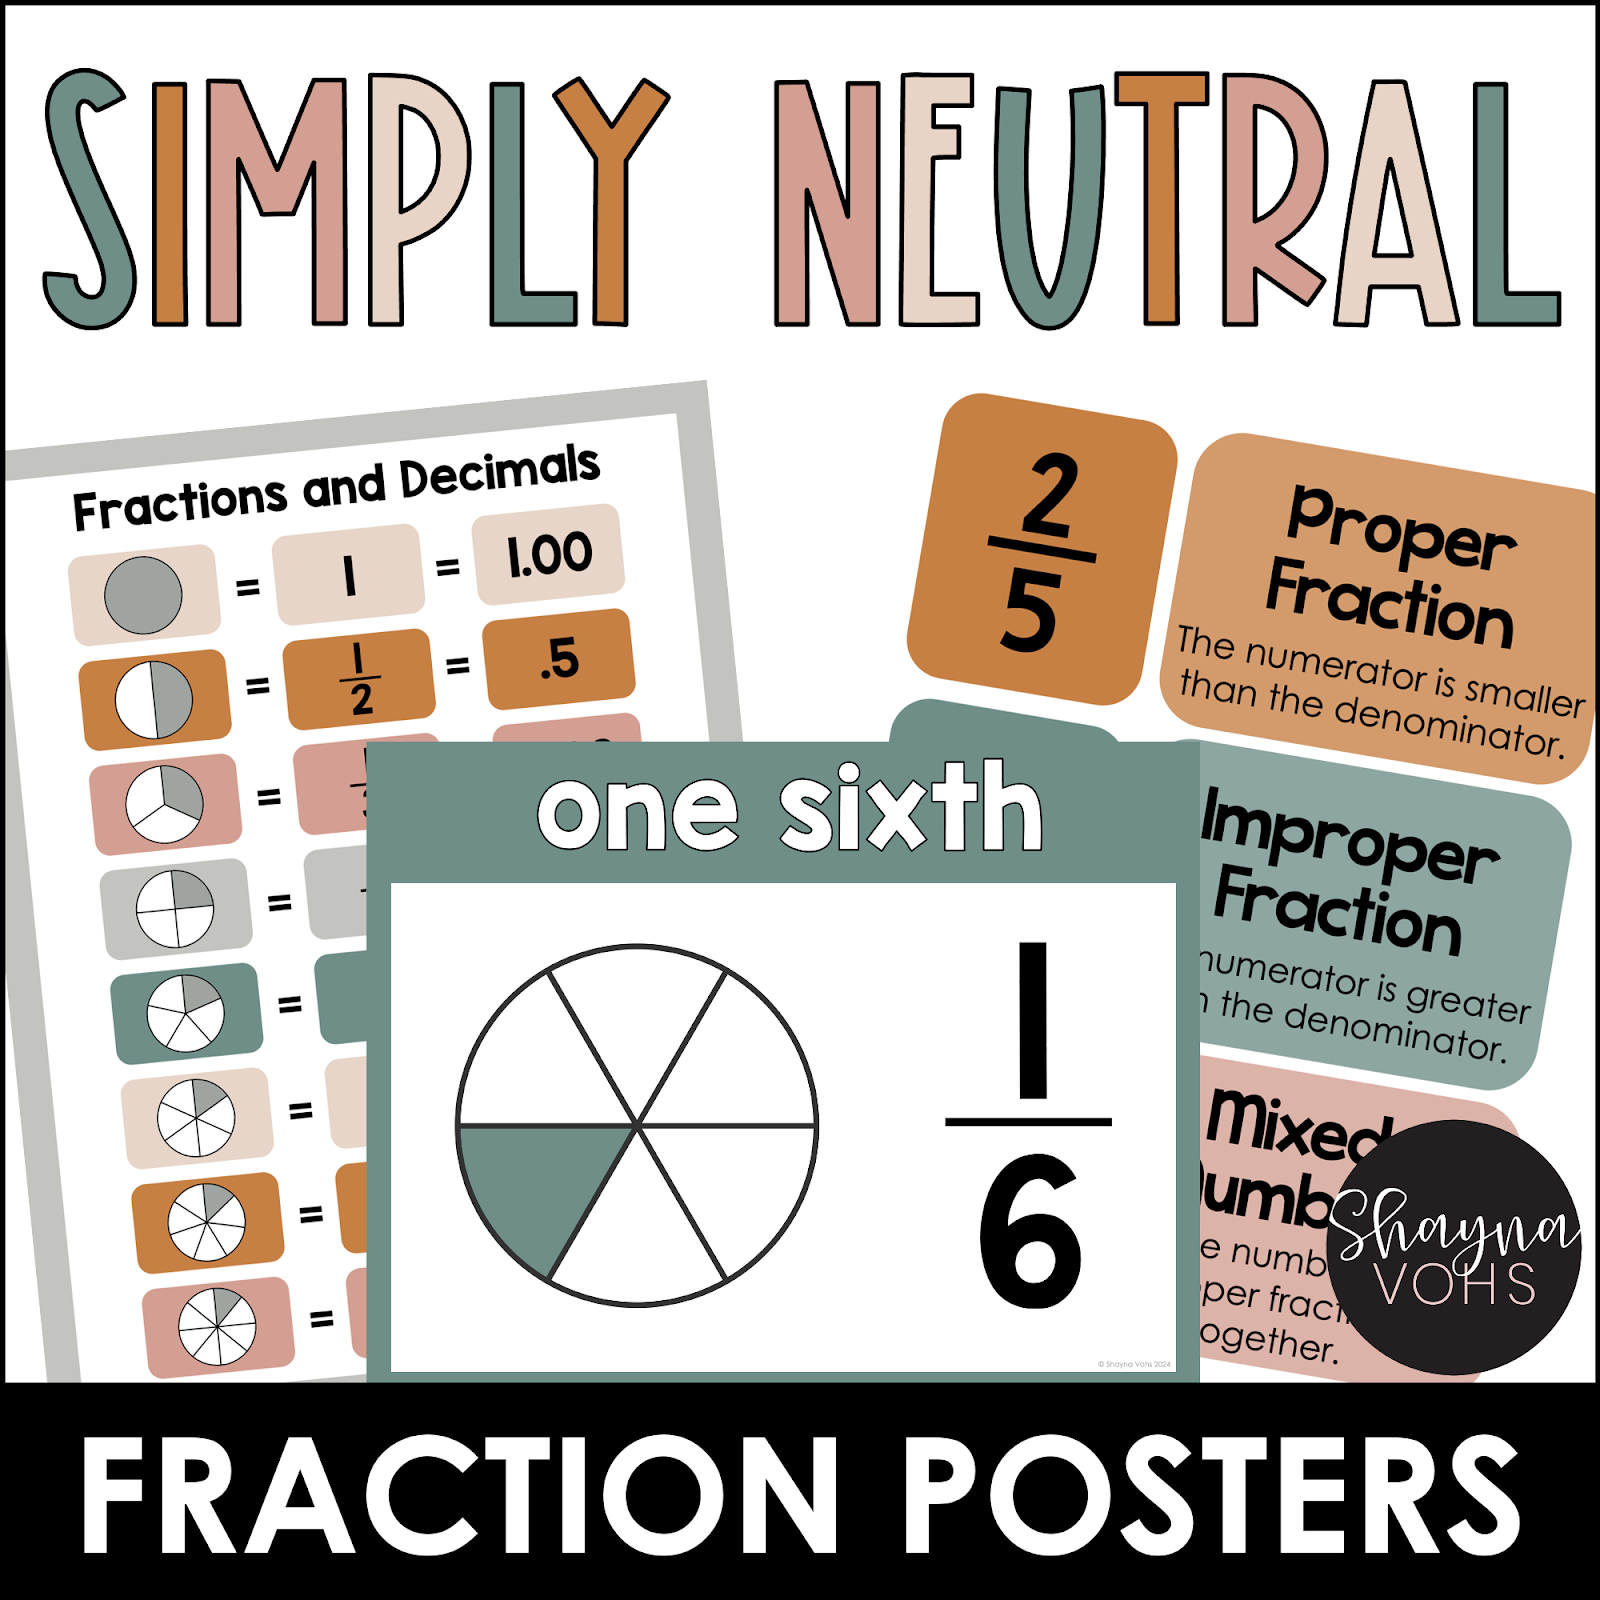 This image shows fraction posters in a Simply Neutral color scheme. 